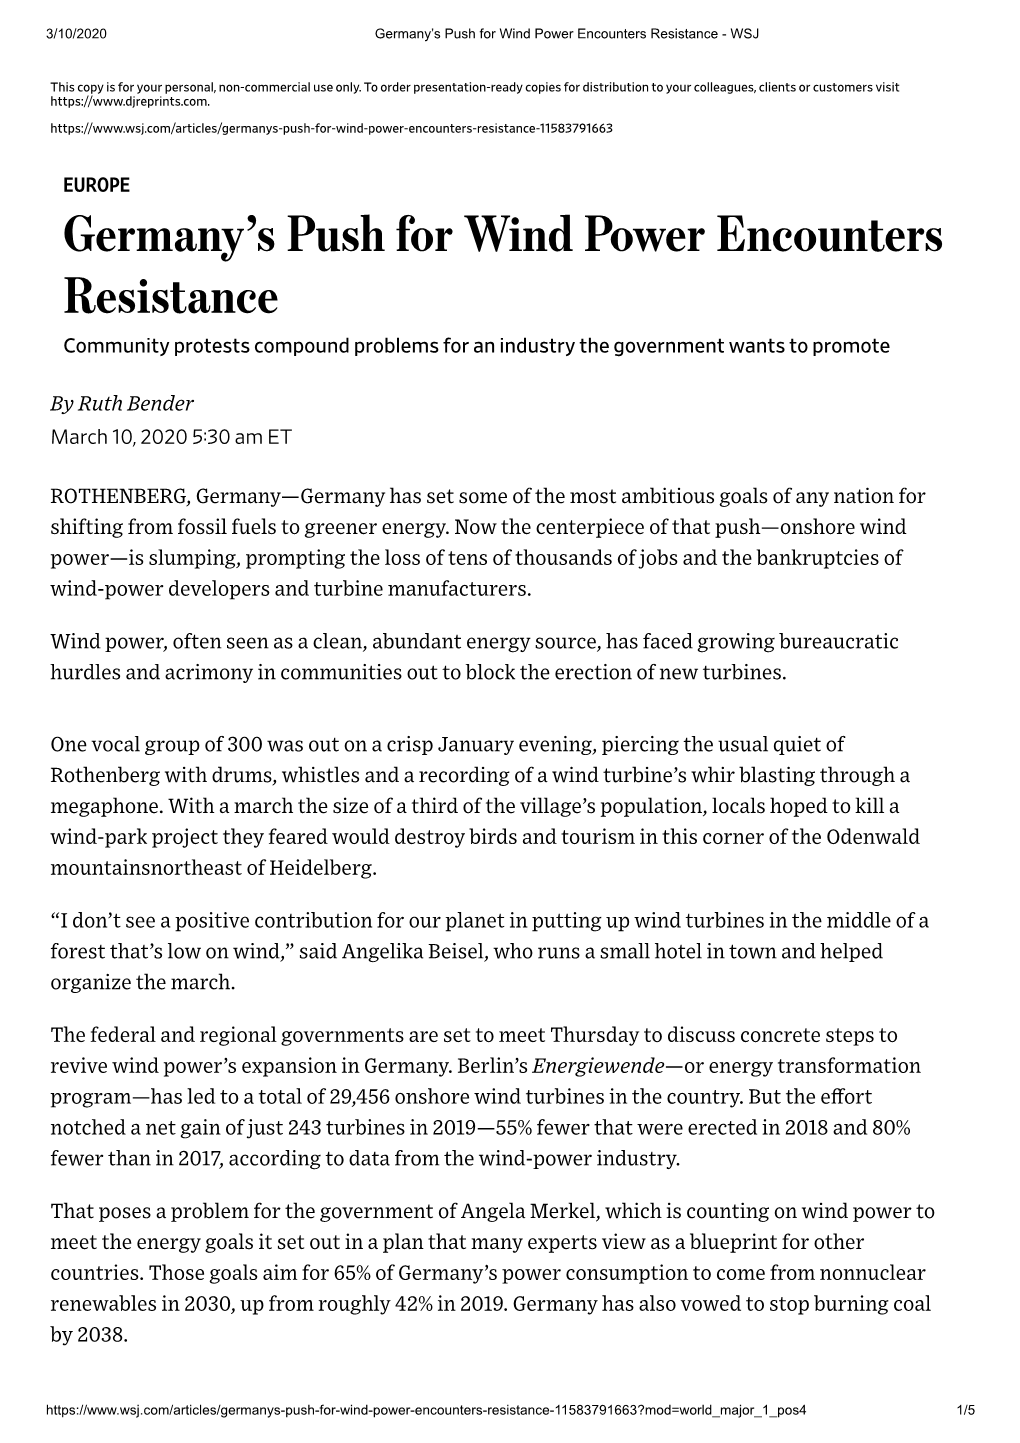 Germany's Push for Wind Power Encounters Resistance